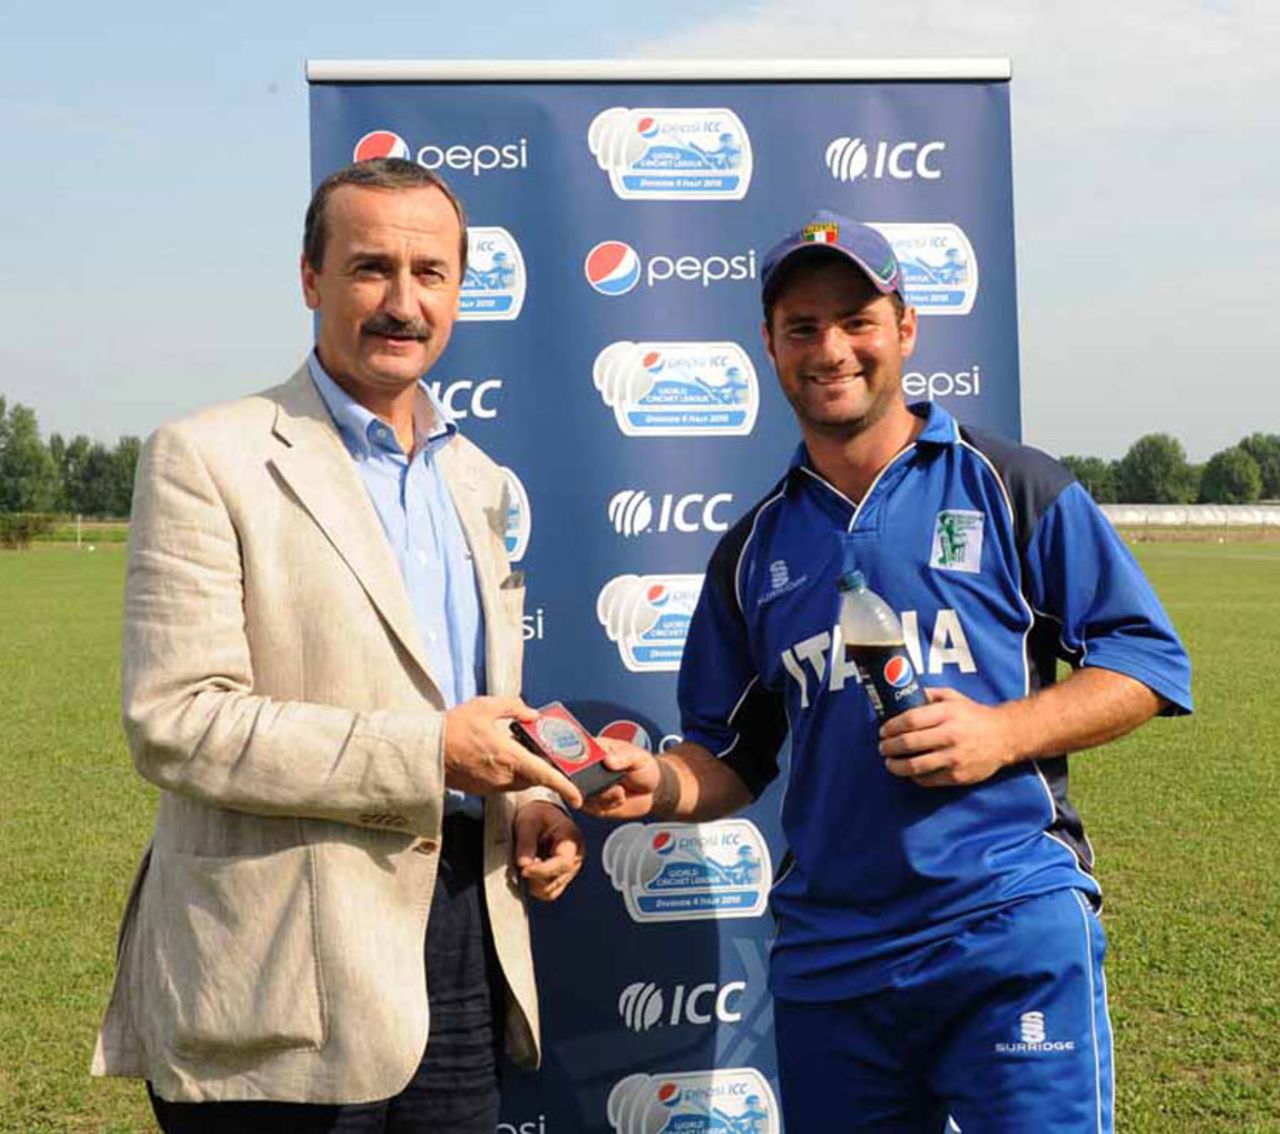 Peter Petricola receives the Man-of-the-Match award, Italy v Tanzania, ICC WCL Div. 4, Navile, August 20, 2010